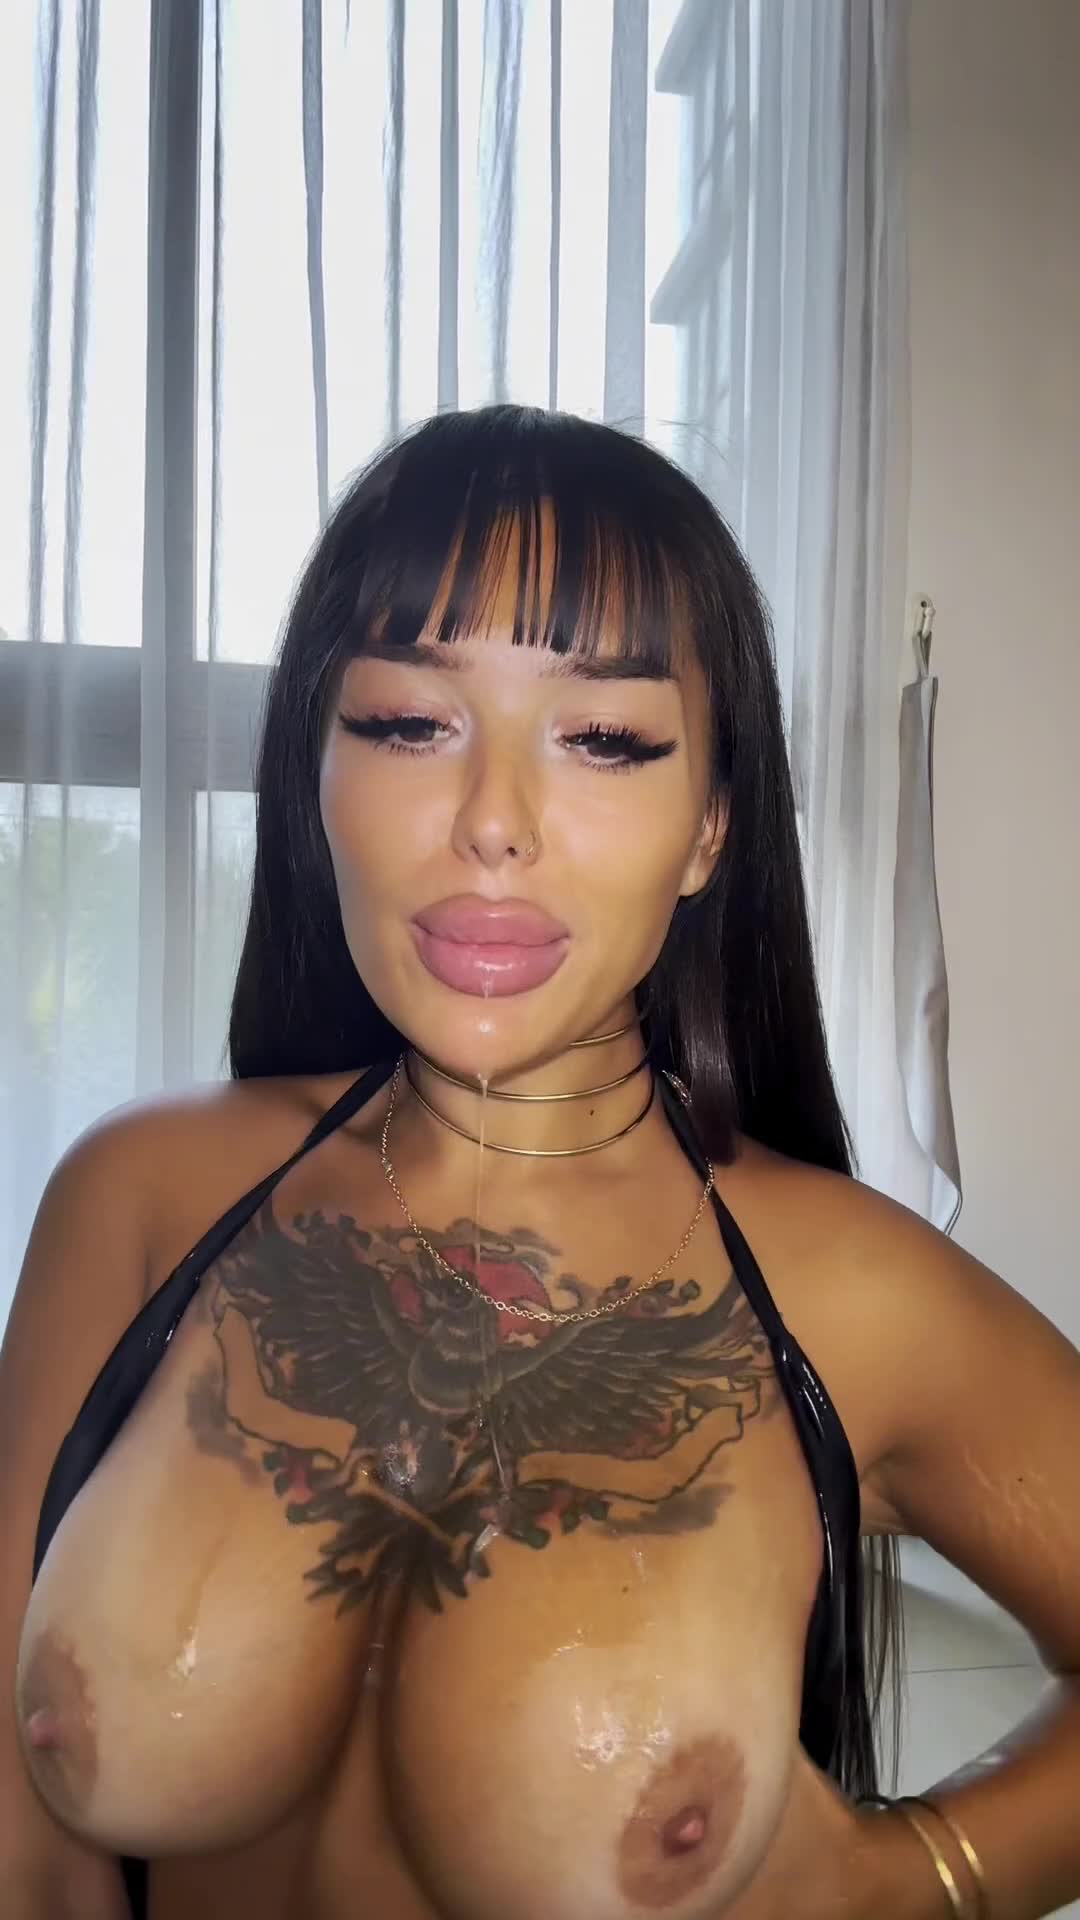 You up for licking some tits covered in drool?